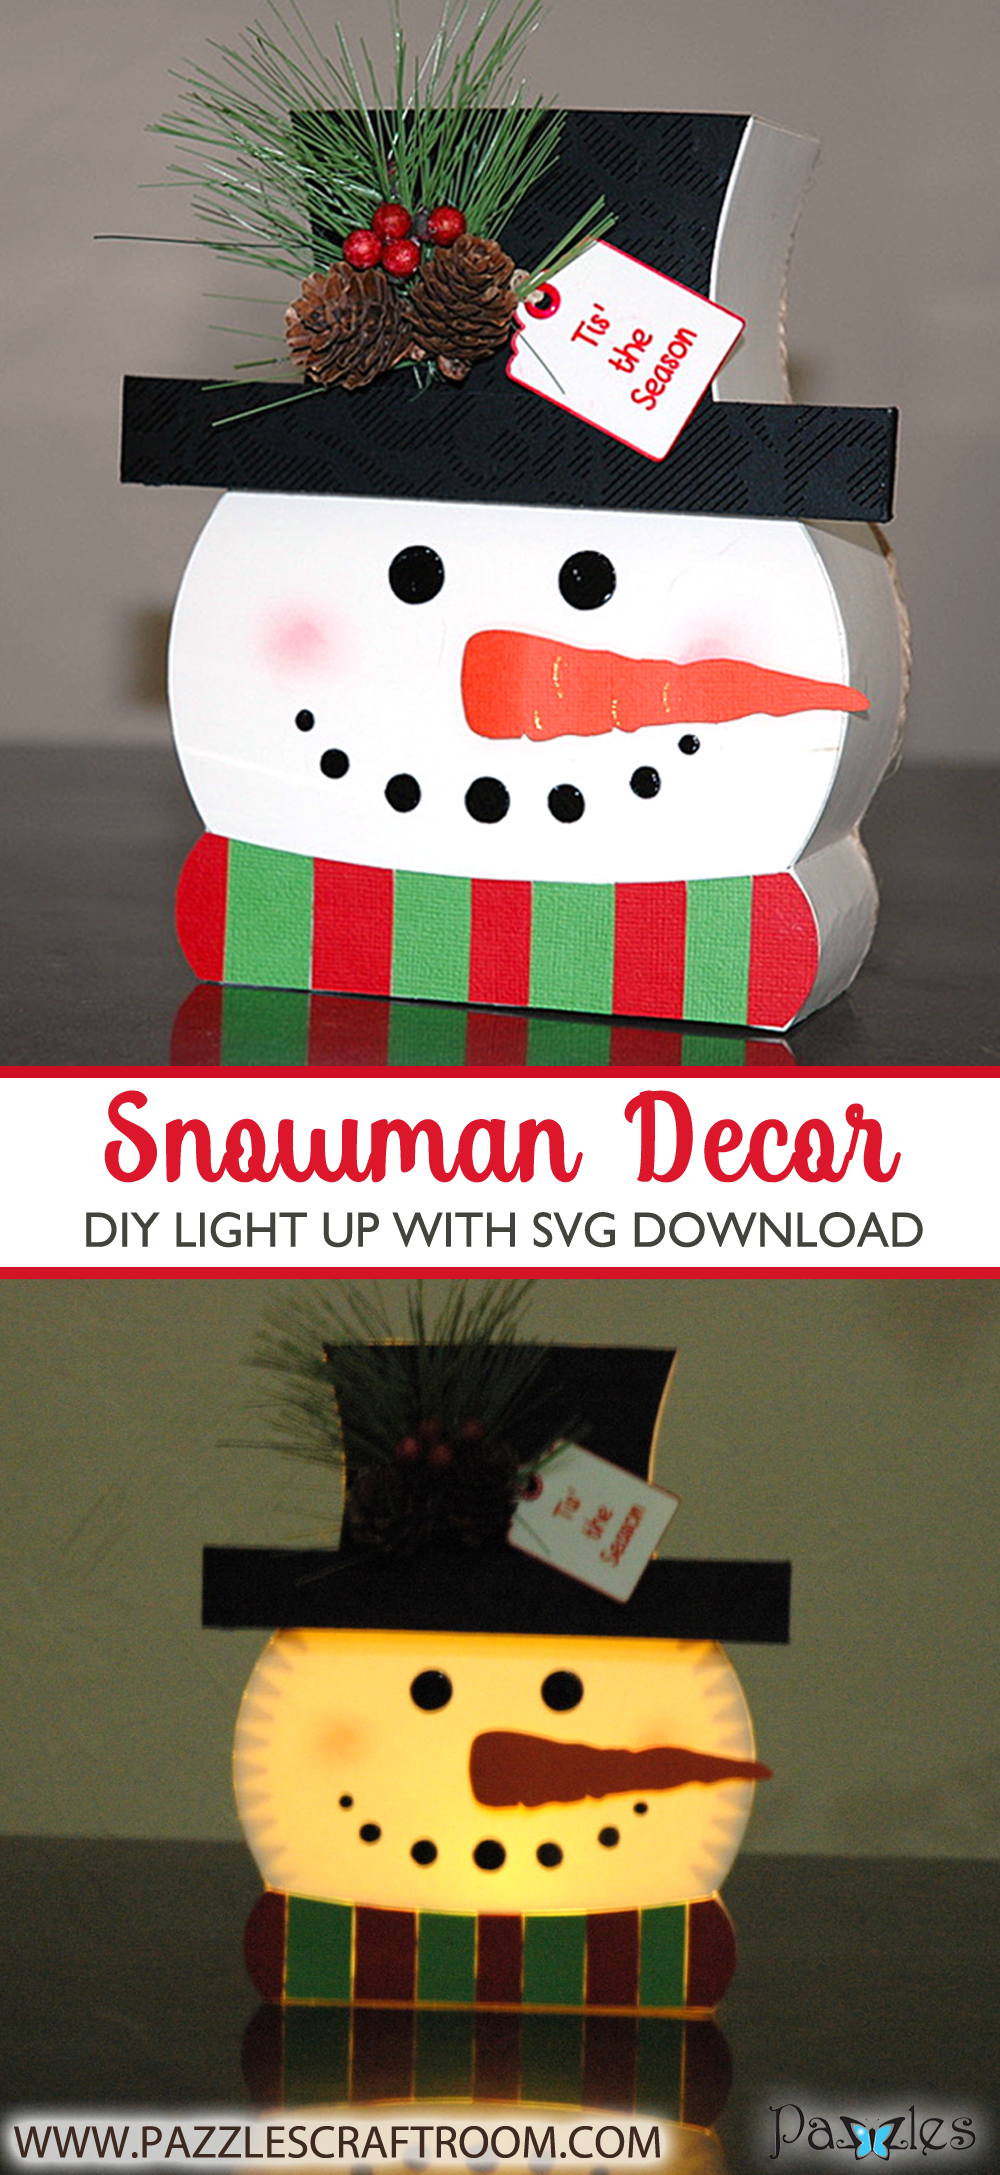 Pazzles Light Up DIY Snowman Decoration with instant SVG download. Compatible with all major electronic cutters including Pazzles Inspiration, Cricut, and Silhouette Cameo. Design by Judy Hanson.